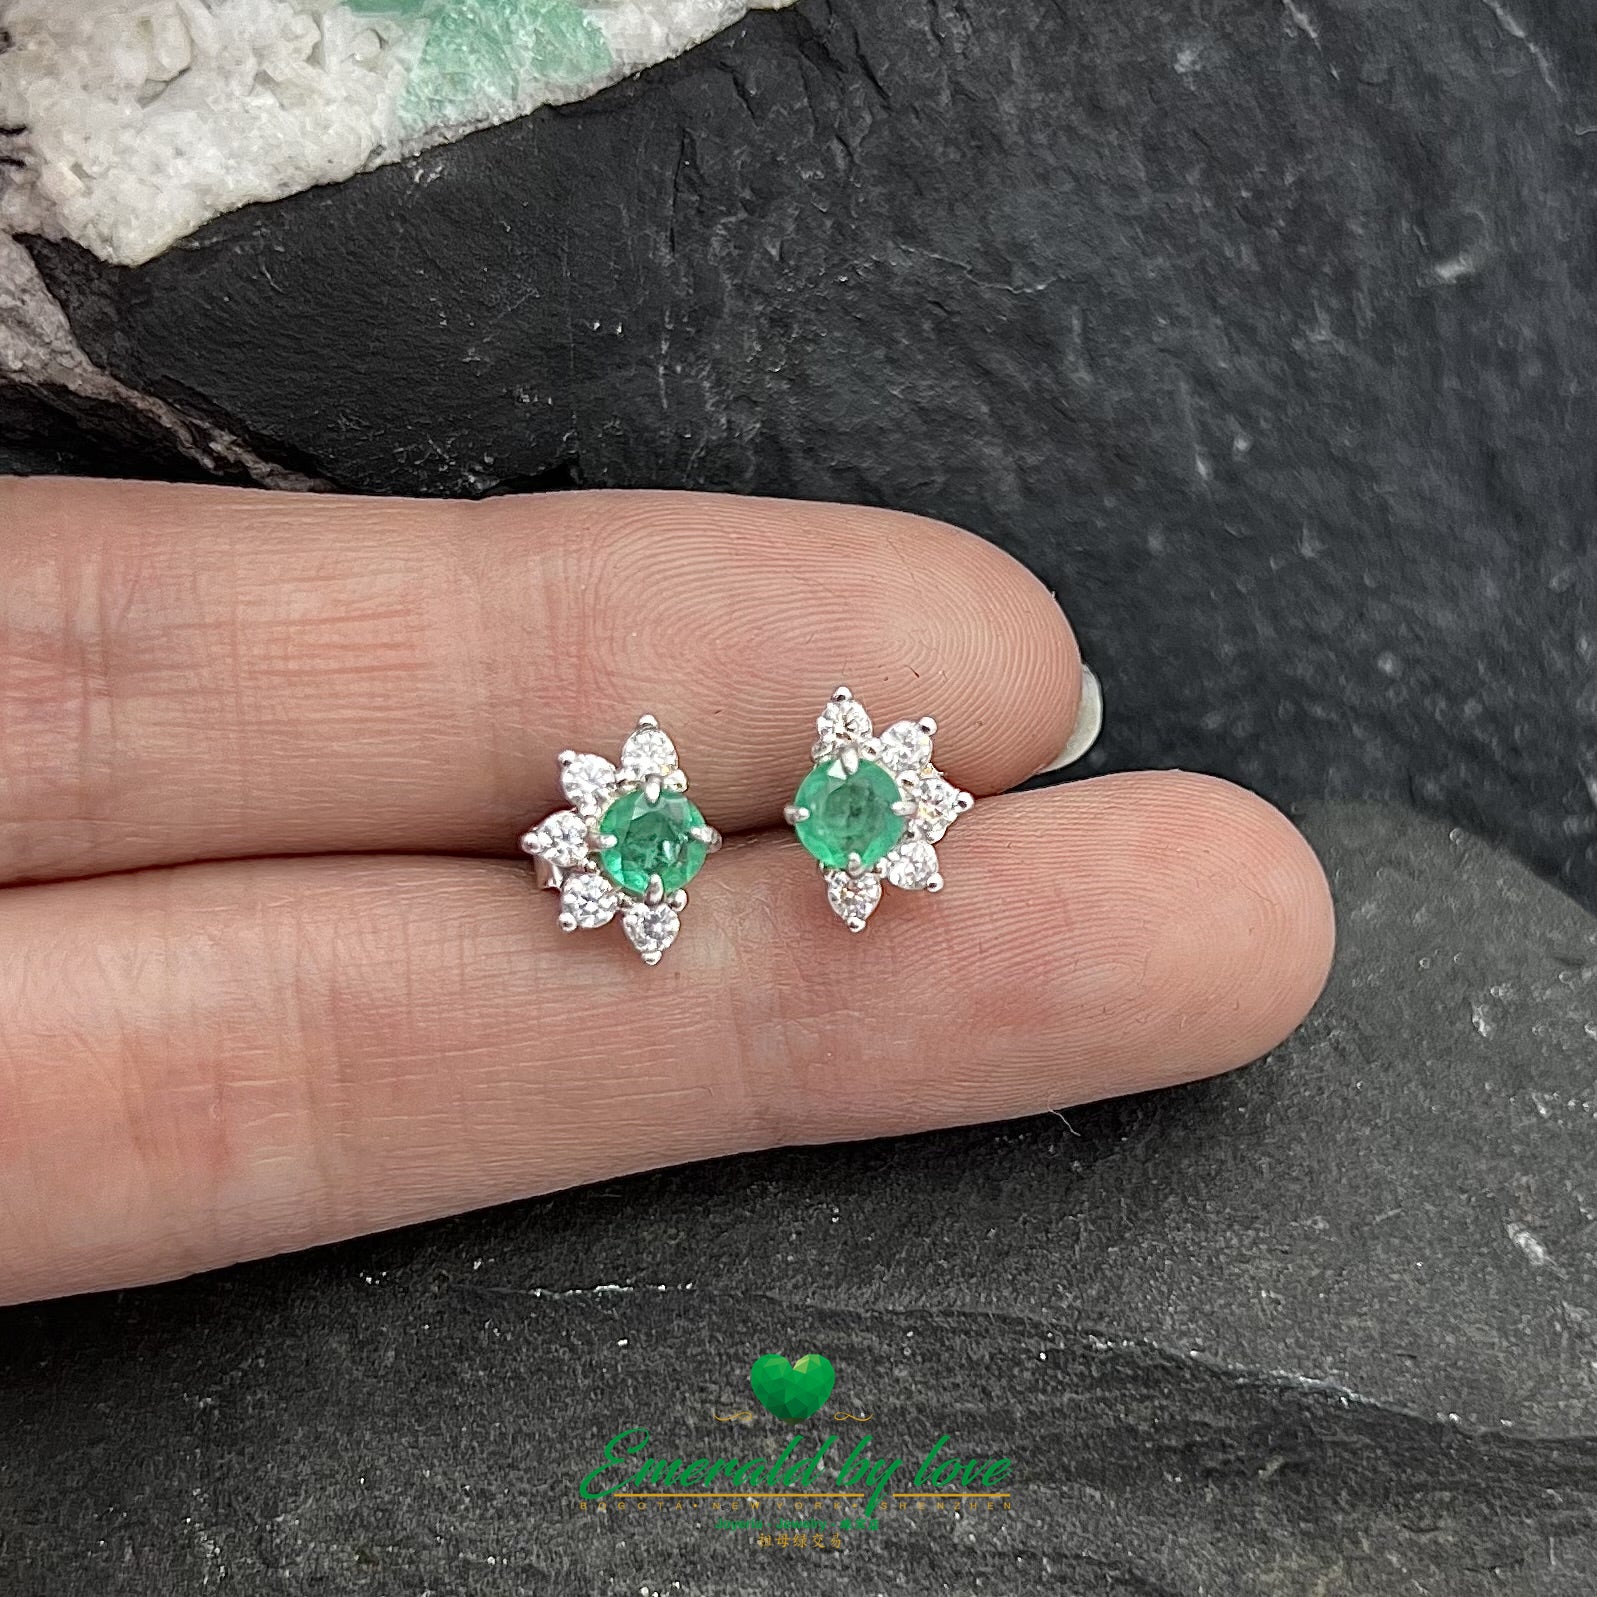 Beautiful Half-Flower Sterling Silver Earrings with Central Round Emerald